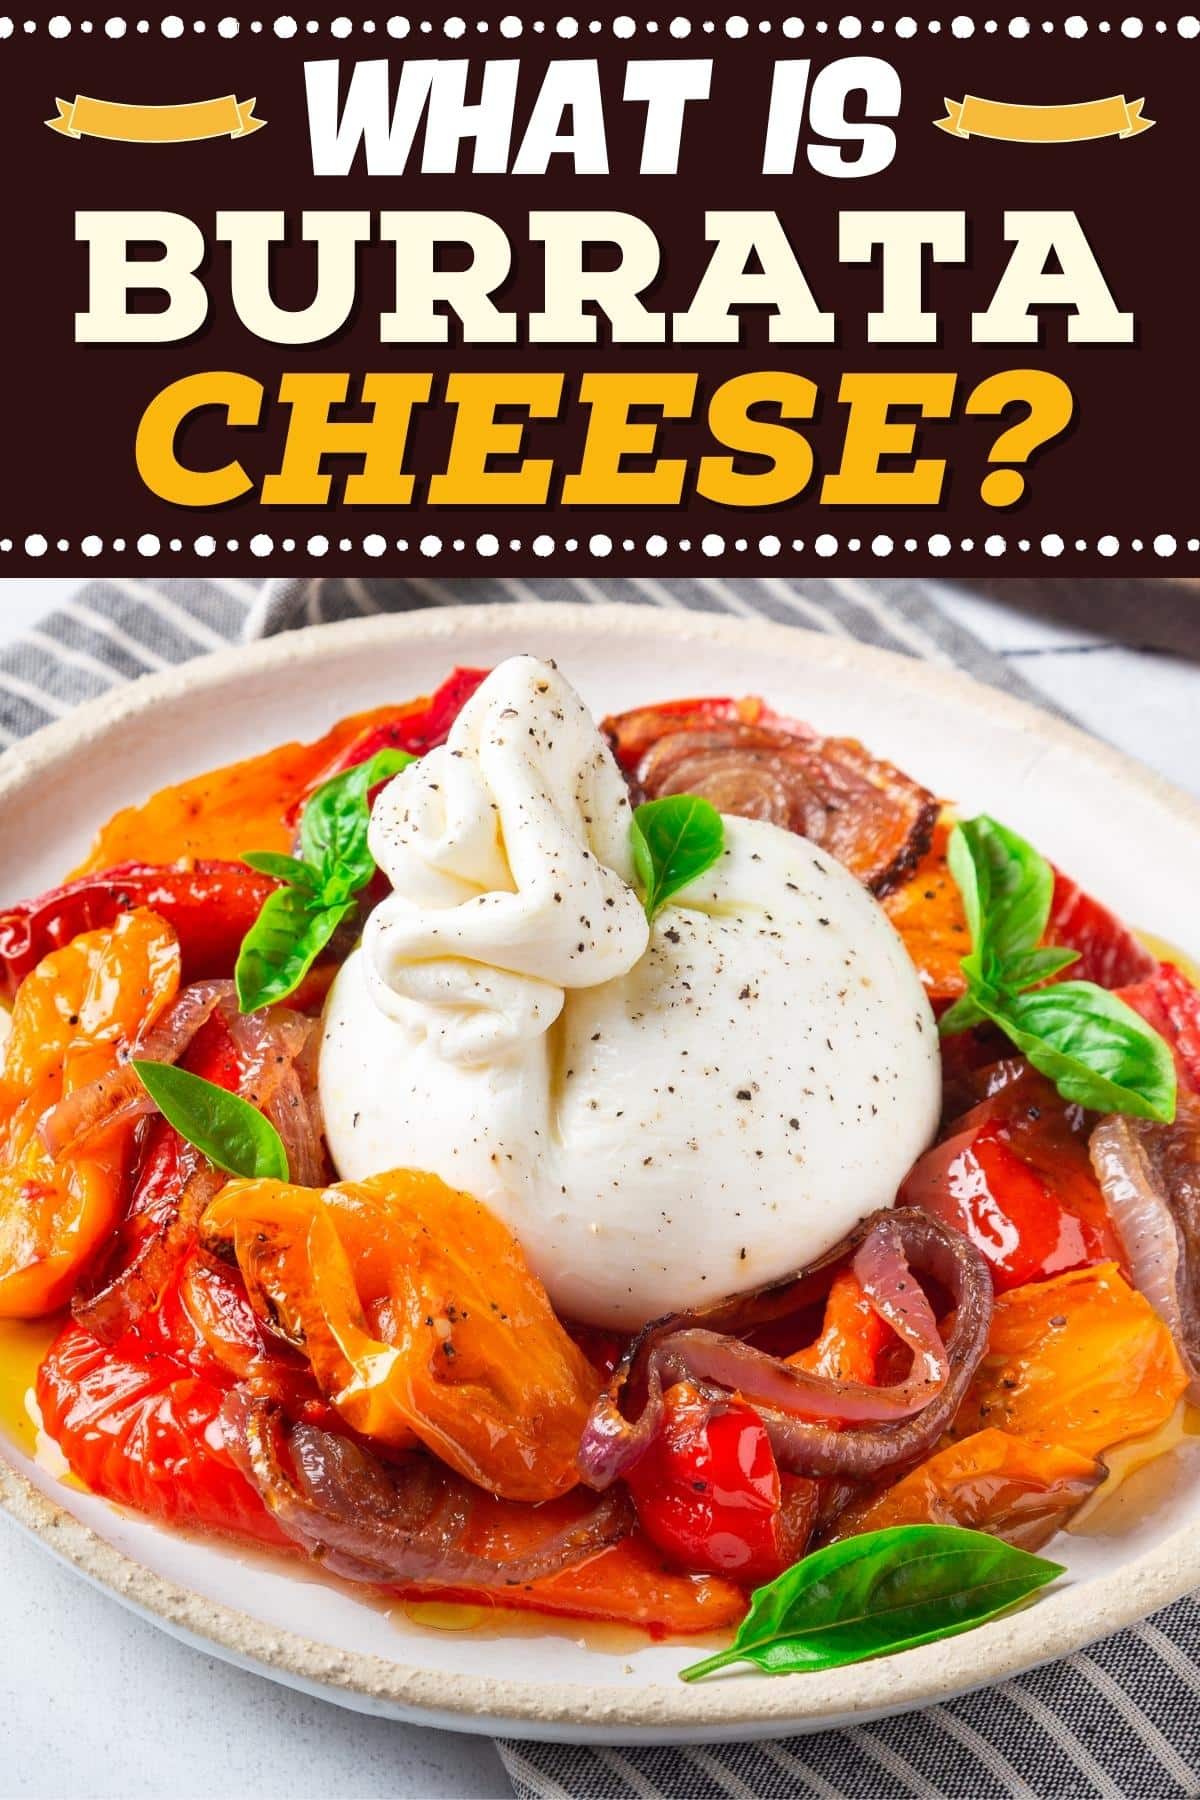 What is Burrata Cheese?